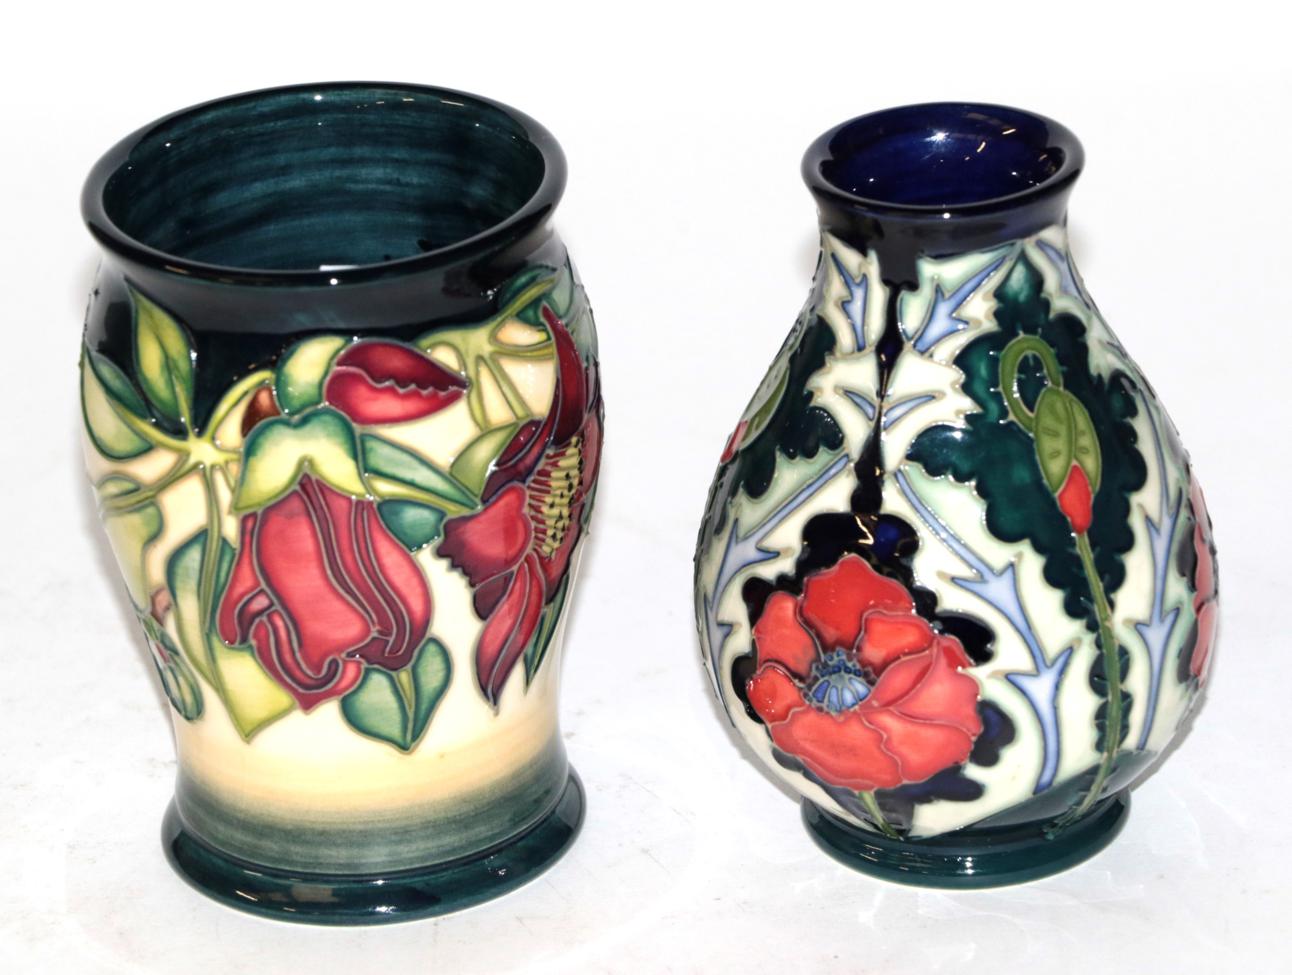 Lot 218 - A Moorcroft vase by Anki Davenport, signed and dated 2000; with another modern Moorcroft vase,...